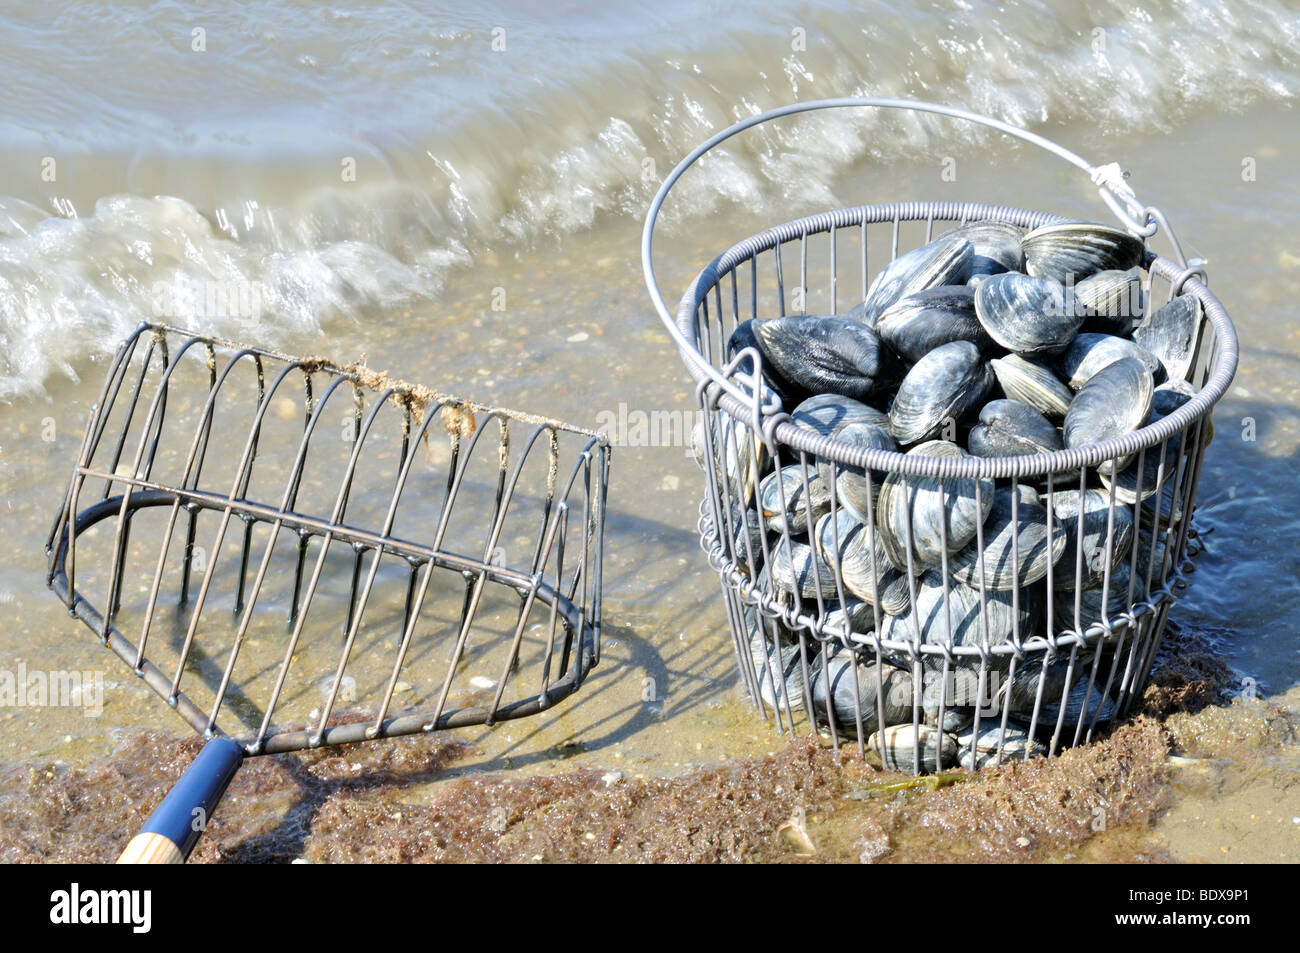 Clamming rake and bucket of freshly harvested quohog clams at beach on Cape Cod Stock Photo